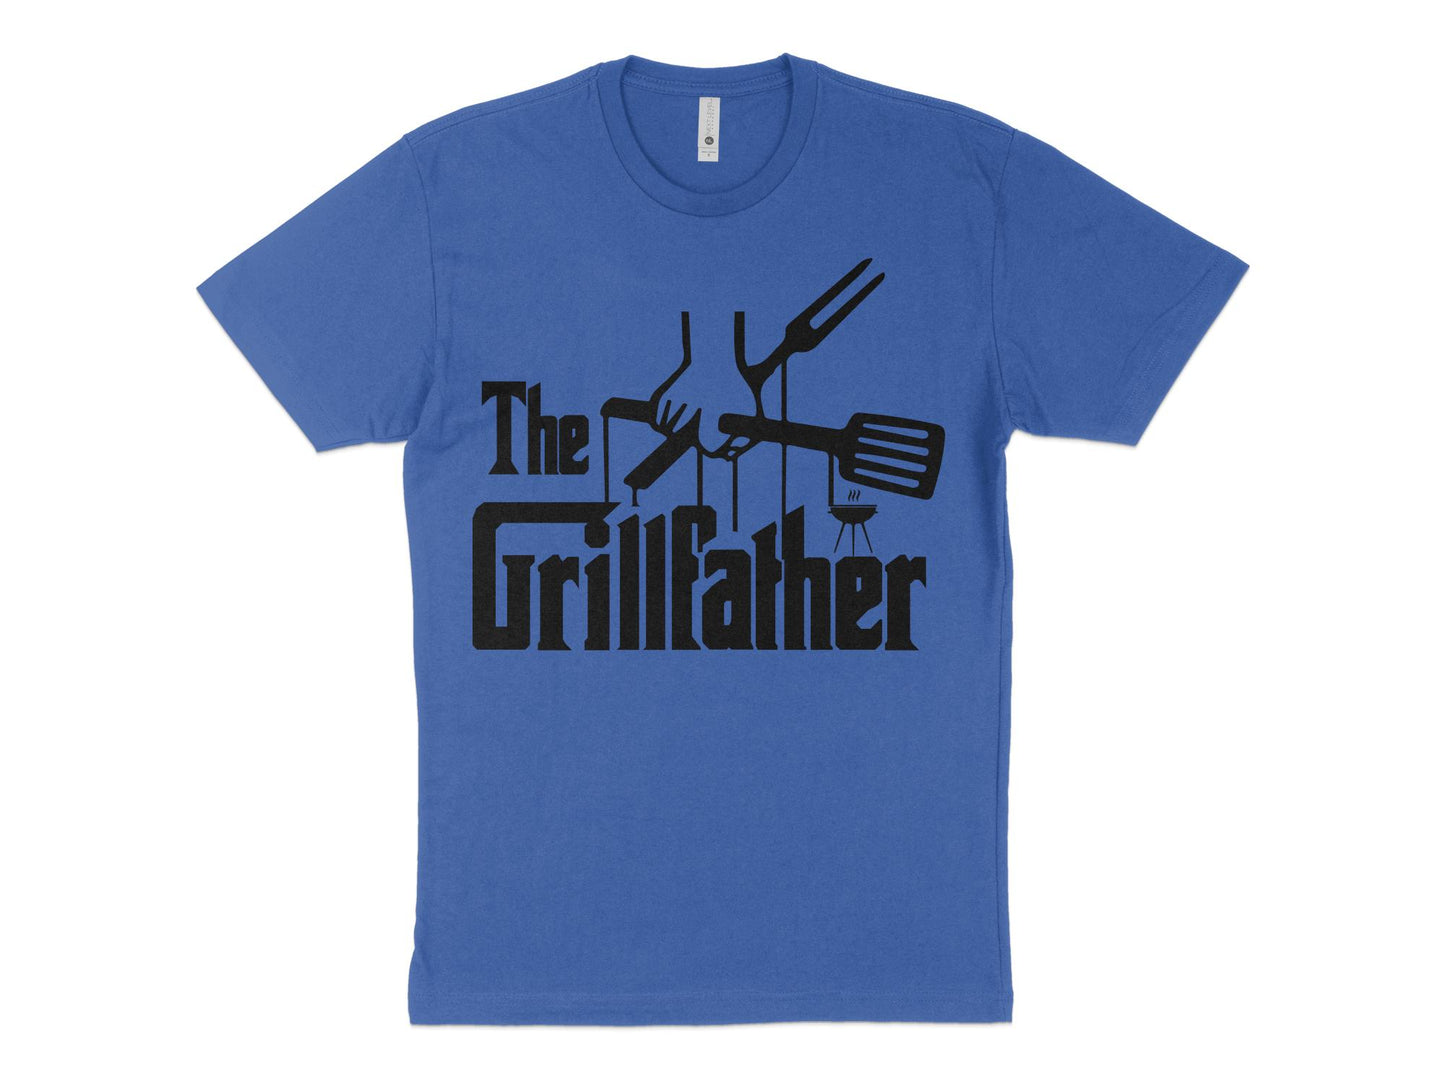 Grillfather T Shirt, royal blue